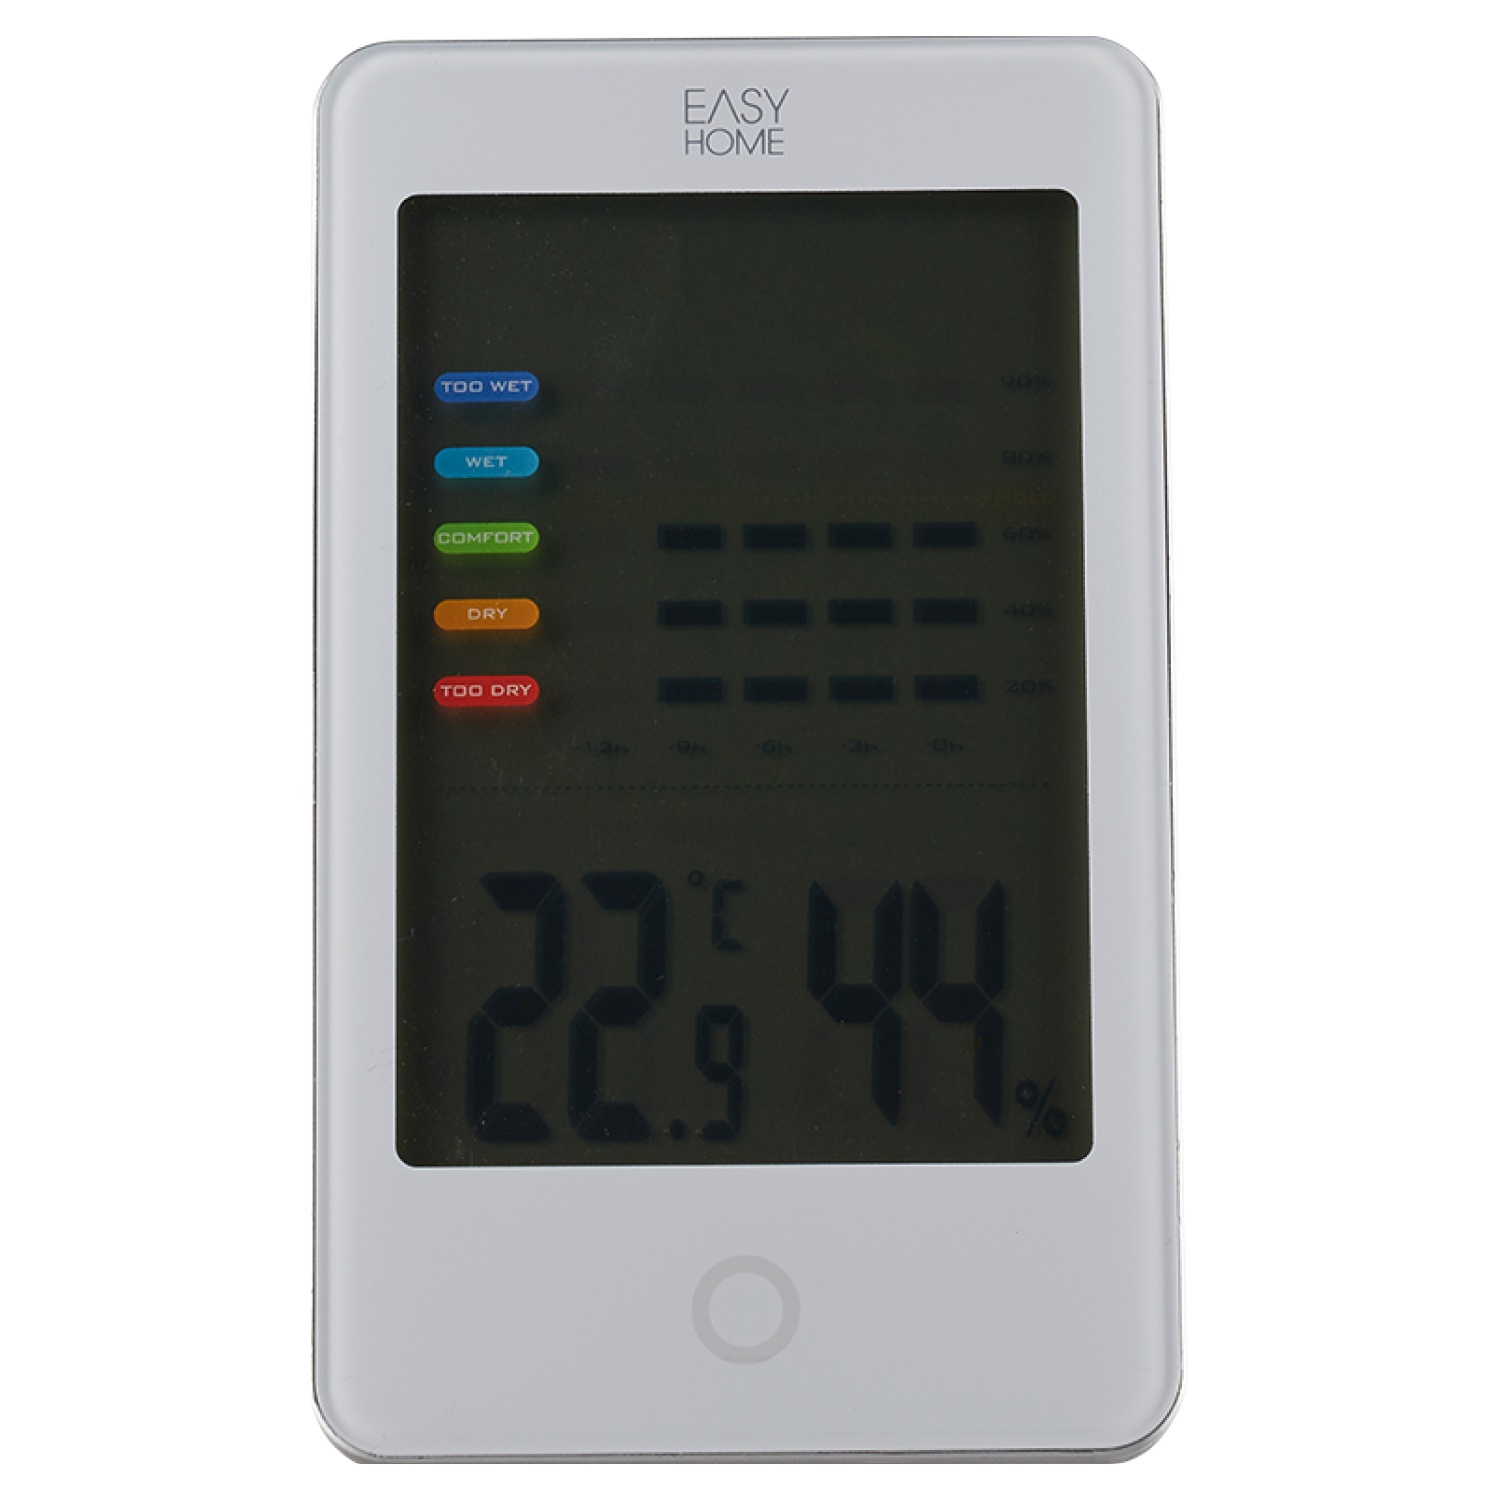 EASY HOME® Thermo-/Hygrometer